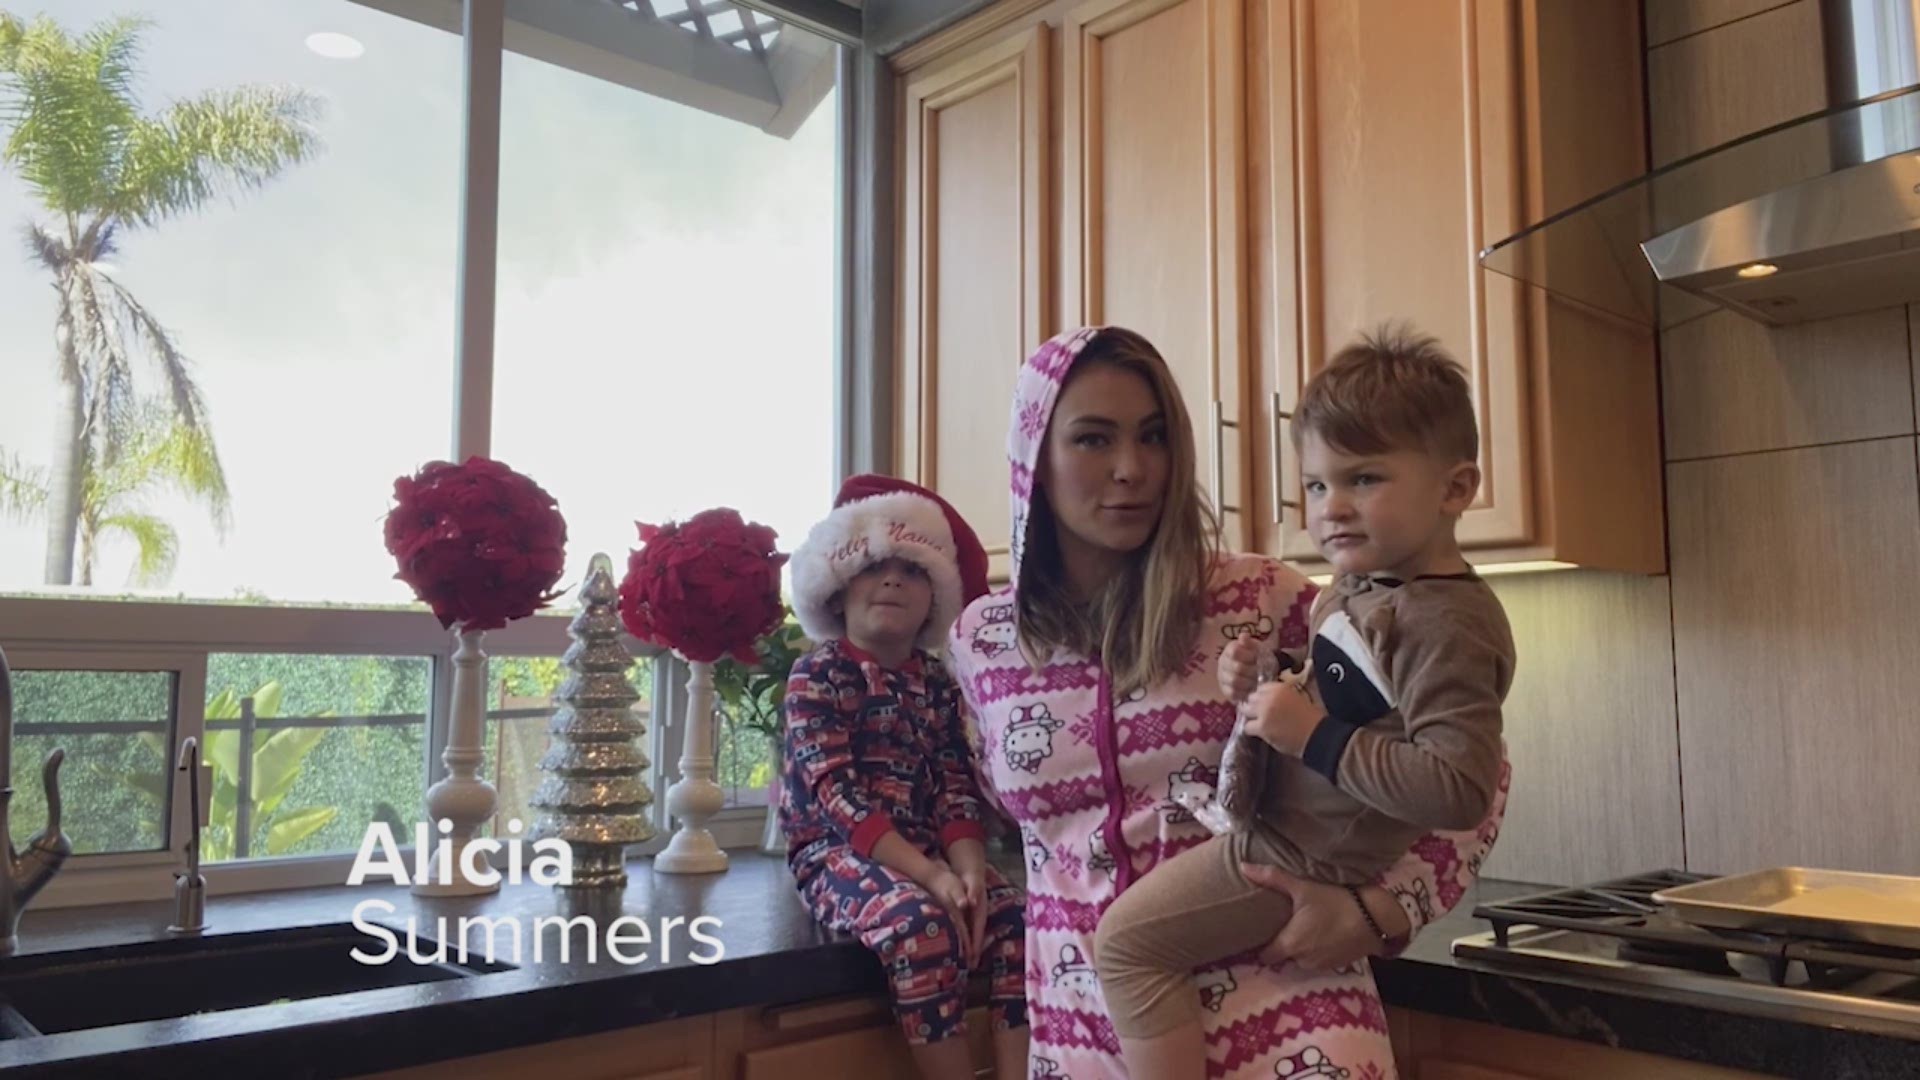 One of our favorite traditions is wearing our holiday onesies and baking for our friends.